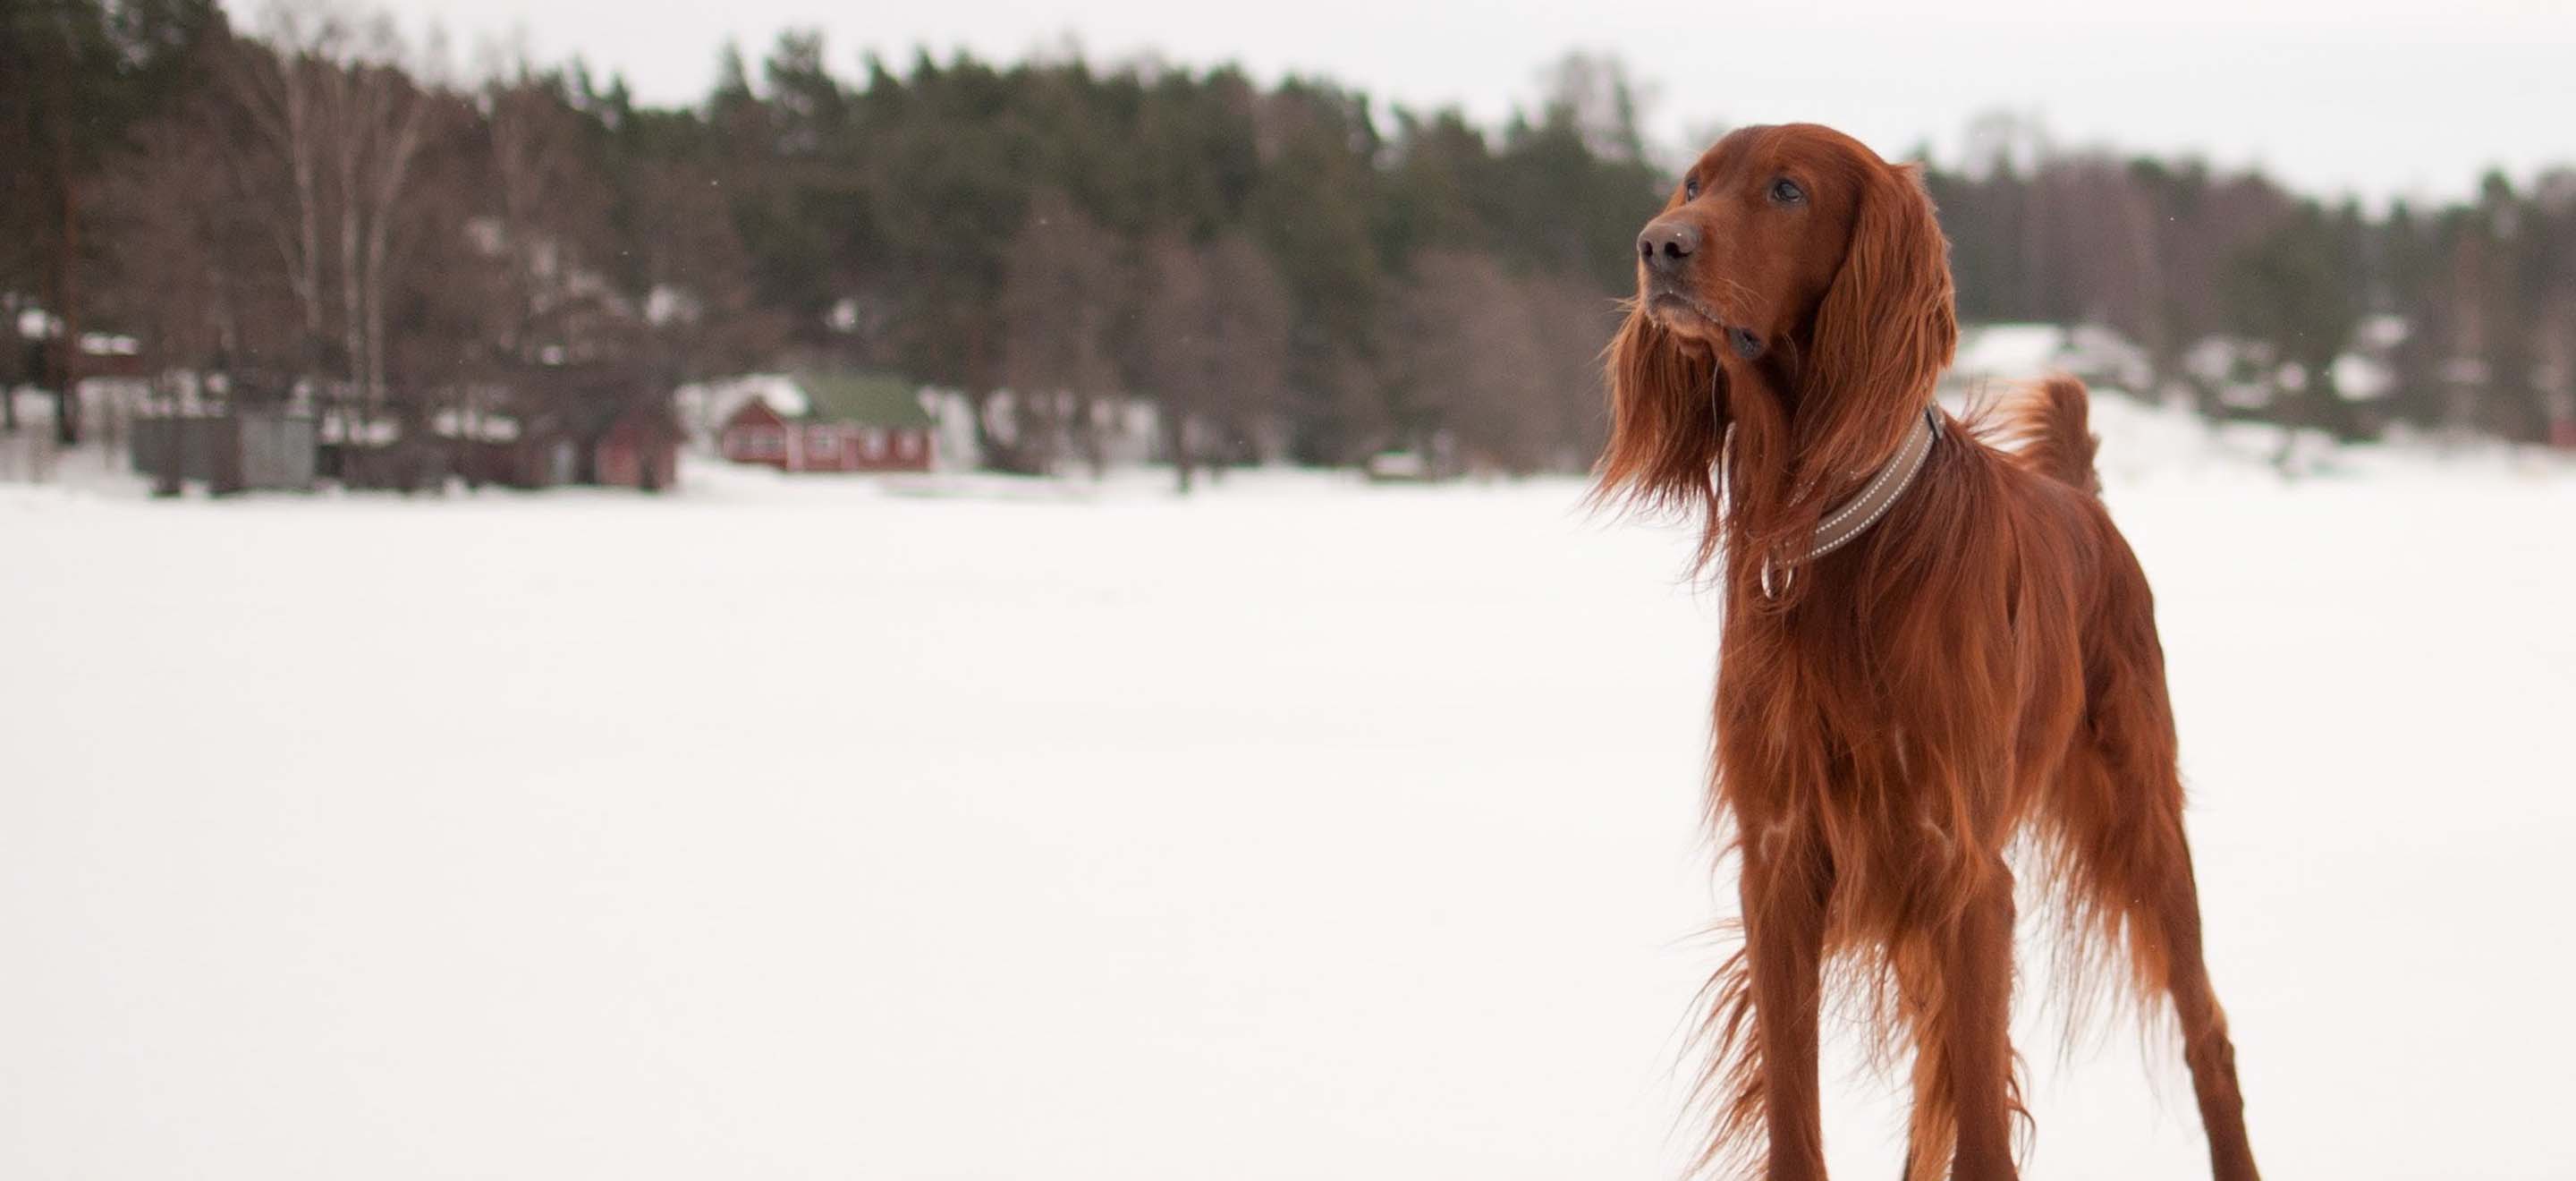 A red Irish Setter dog standing in a snow-covered field image